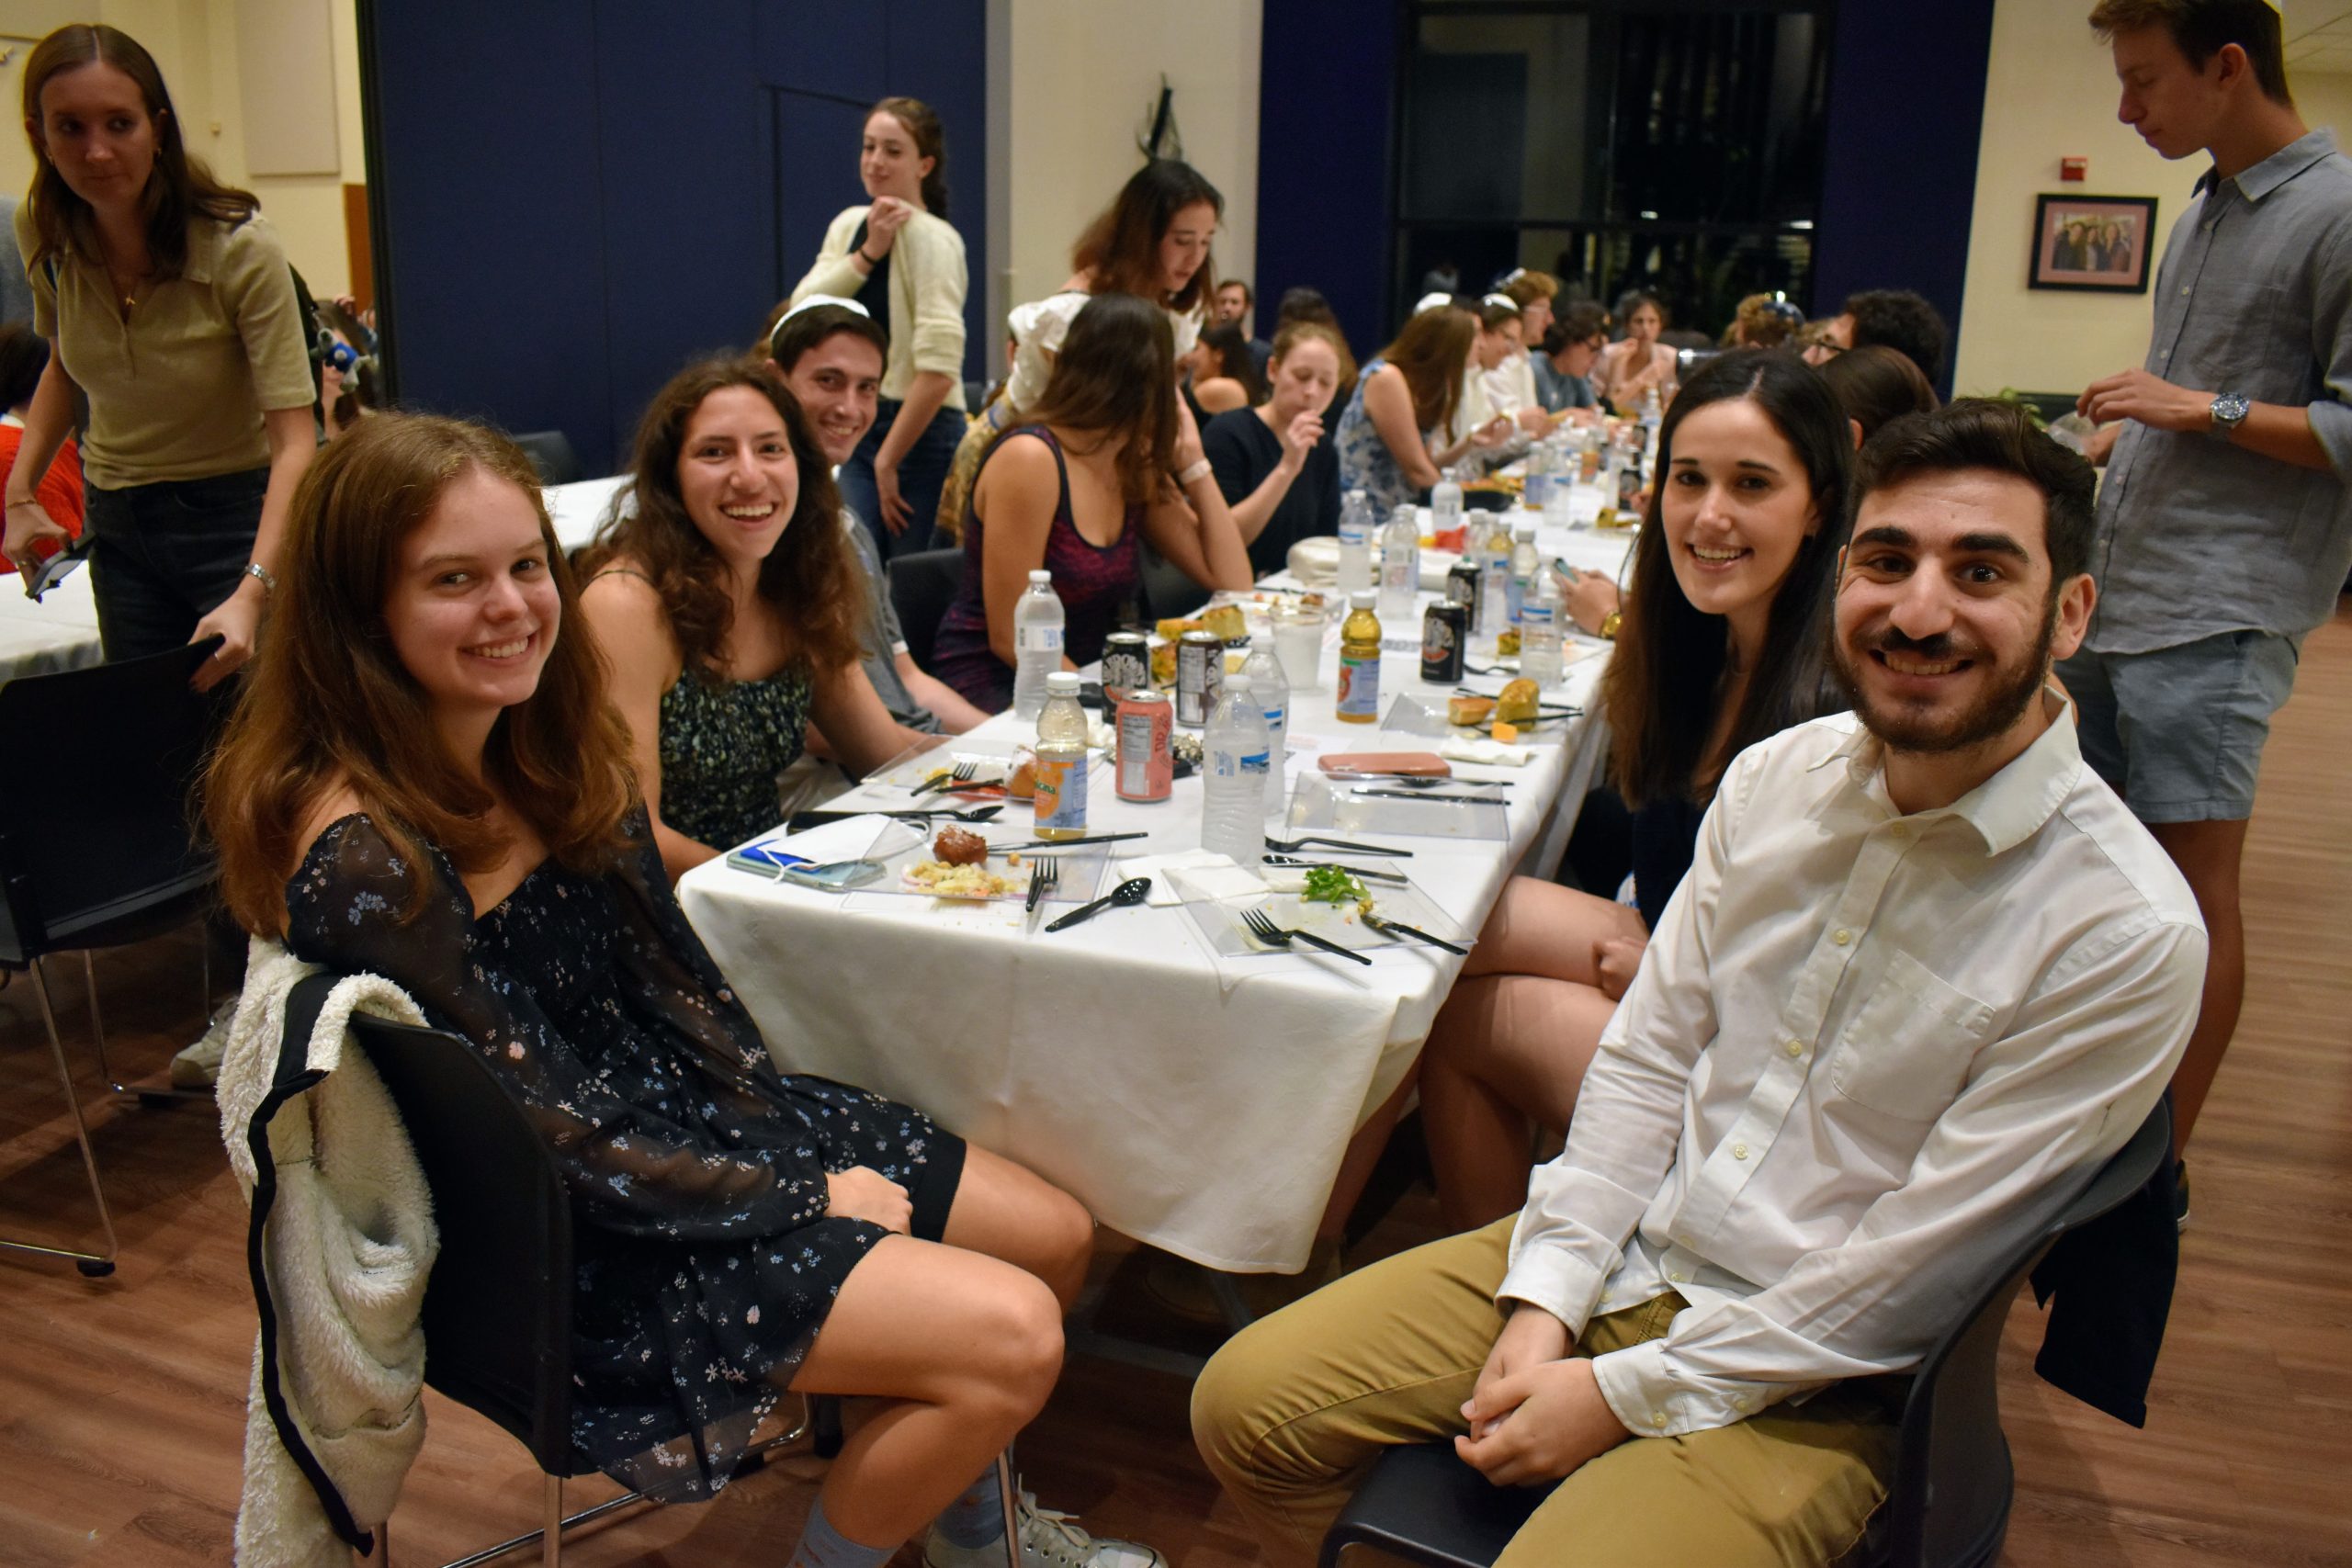 Jewish students enjoy a meal together